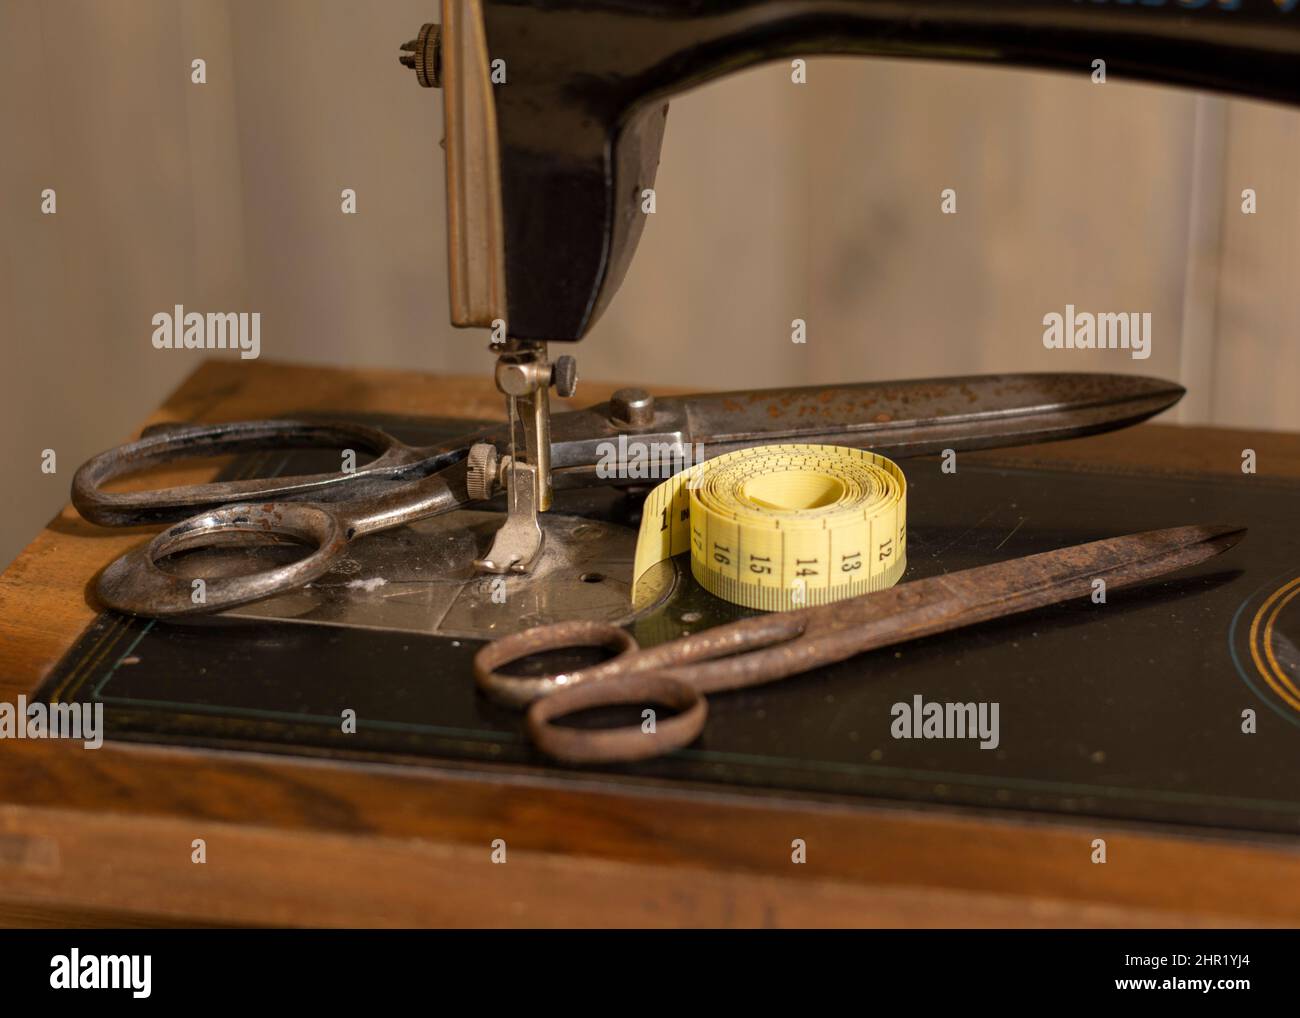 https://c8.alamy.com/comp/2HR1YJ4/old-vintage-sewing-machine-with-an-old-rusty-pair-of-scissors-and-a-tape-measure-sewing-tailor-cloth-ruler-2HR1YJ4.jpg